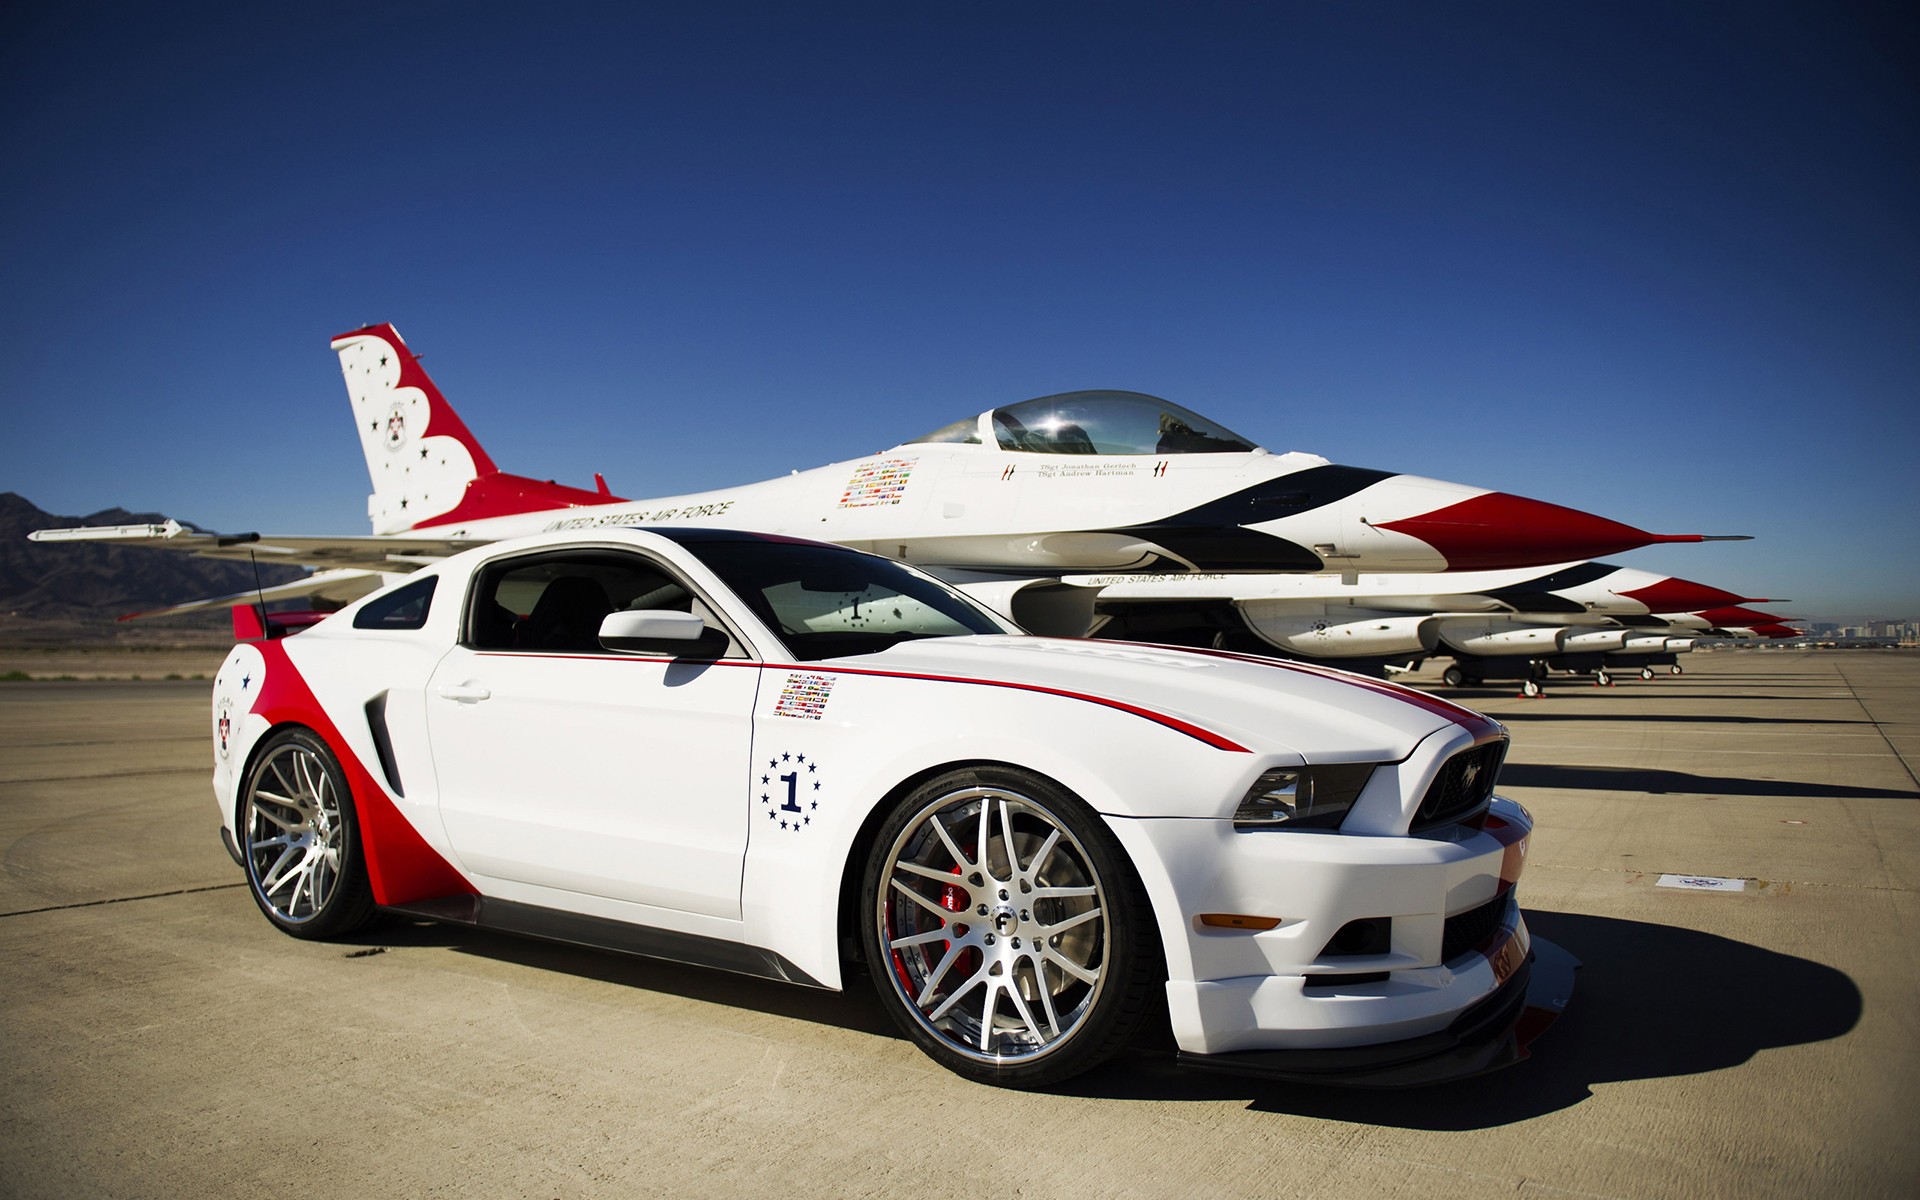 General 1920x1200 car Ford Ford Mustang General Dynamics F-16 Fighting Falcon thunderbirds Ford Mustang GT US AirForce Edition vehicle aircraft military military aircraft military vehicle white cars Ford Mustang S-197 II